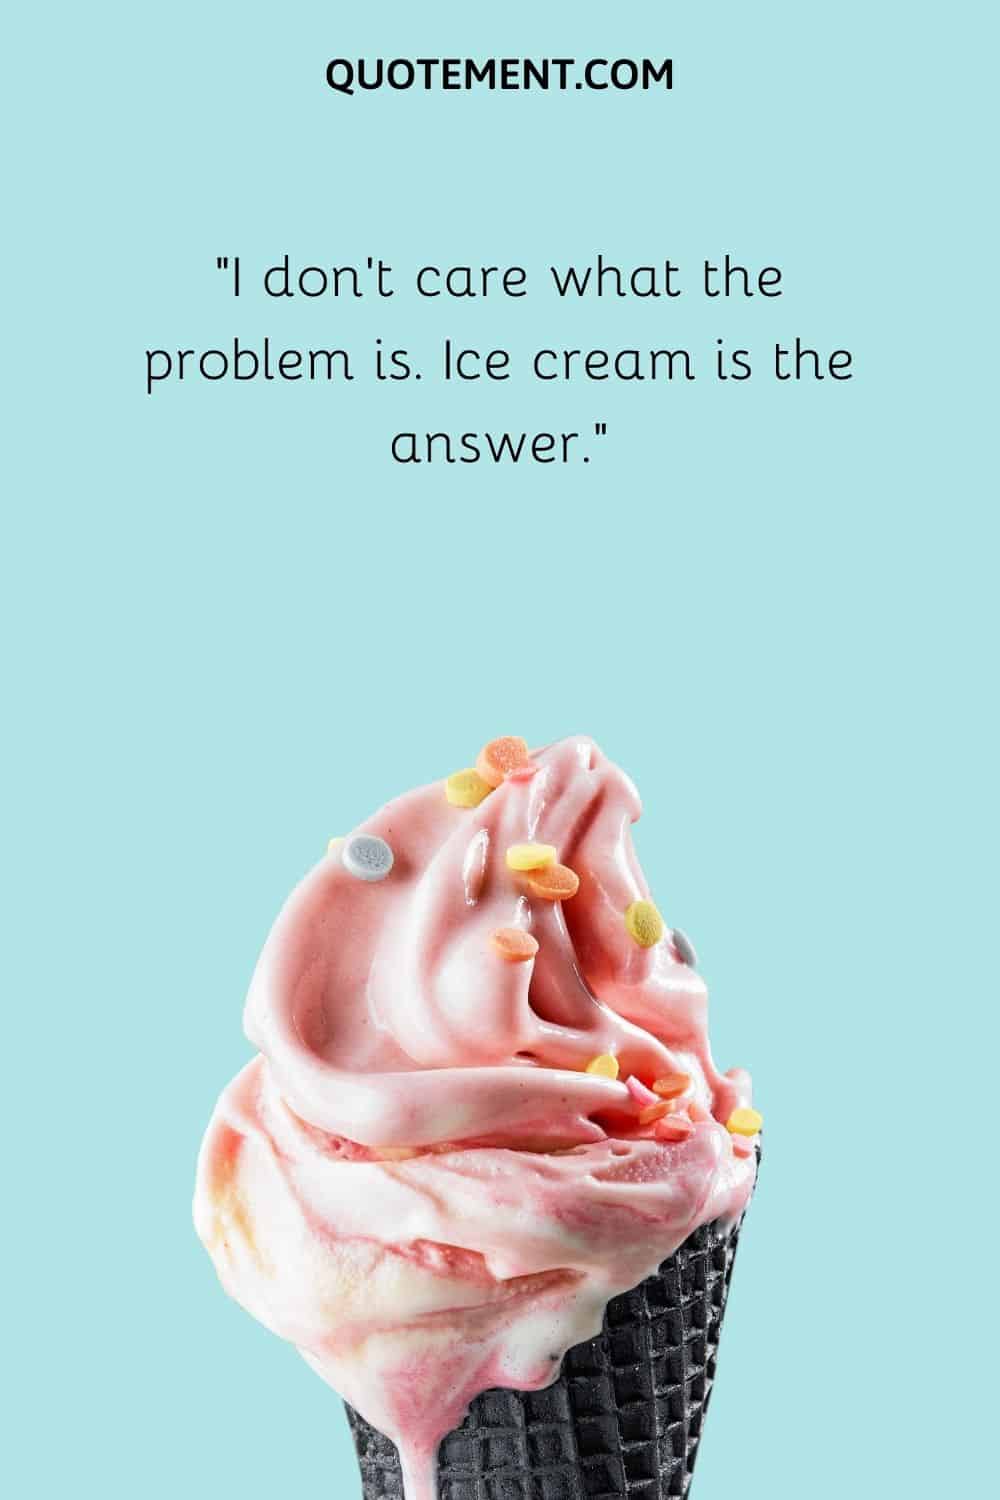 Ice cream is the answer